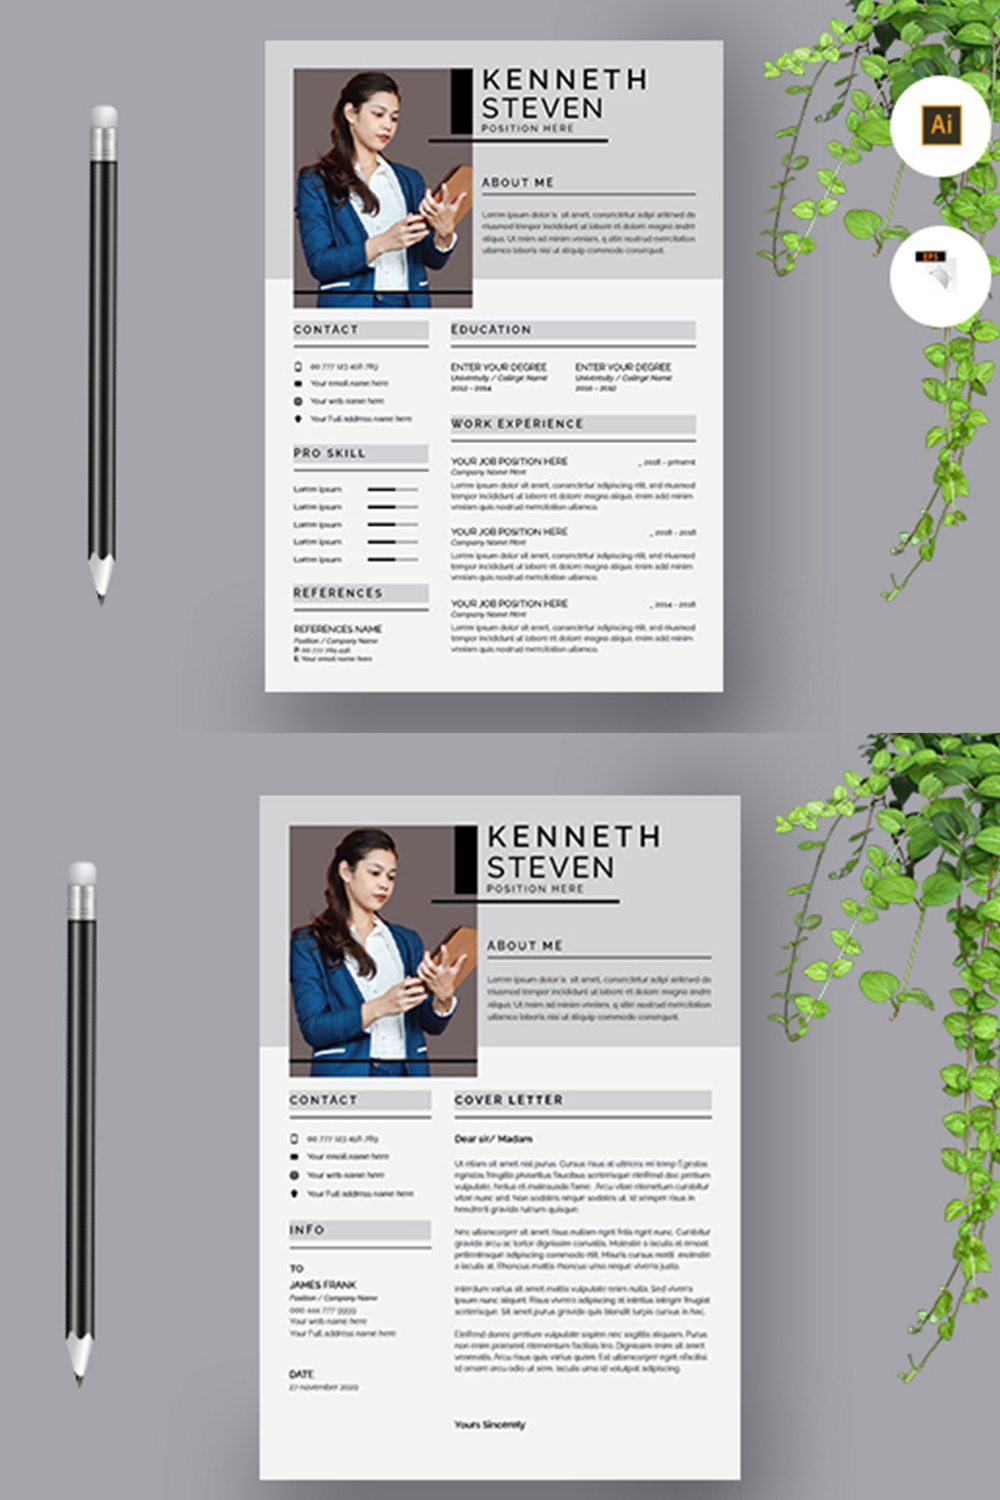 Set of two resume templates with a green plant.